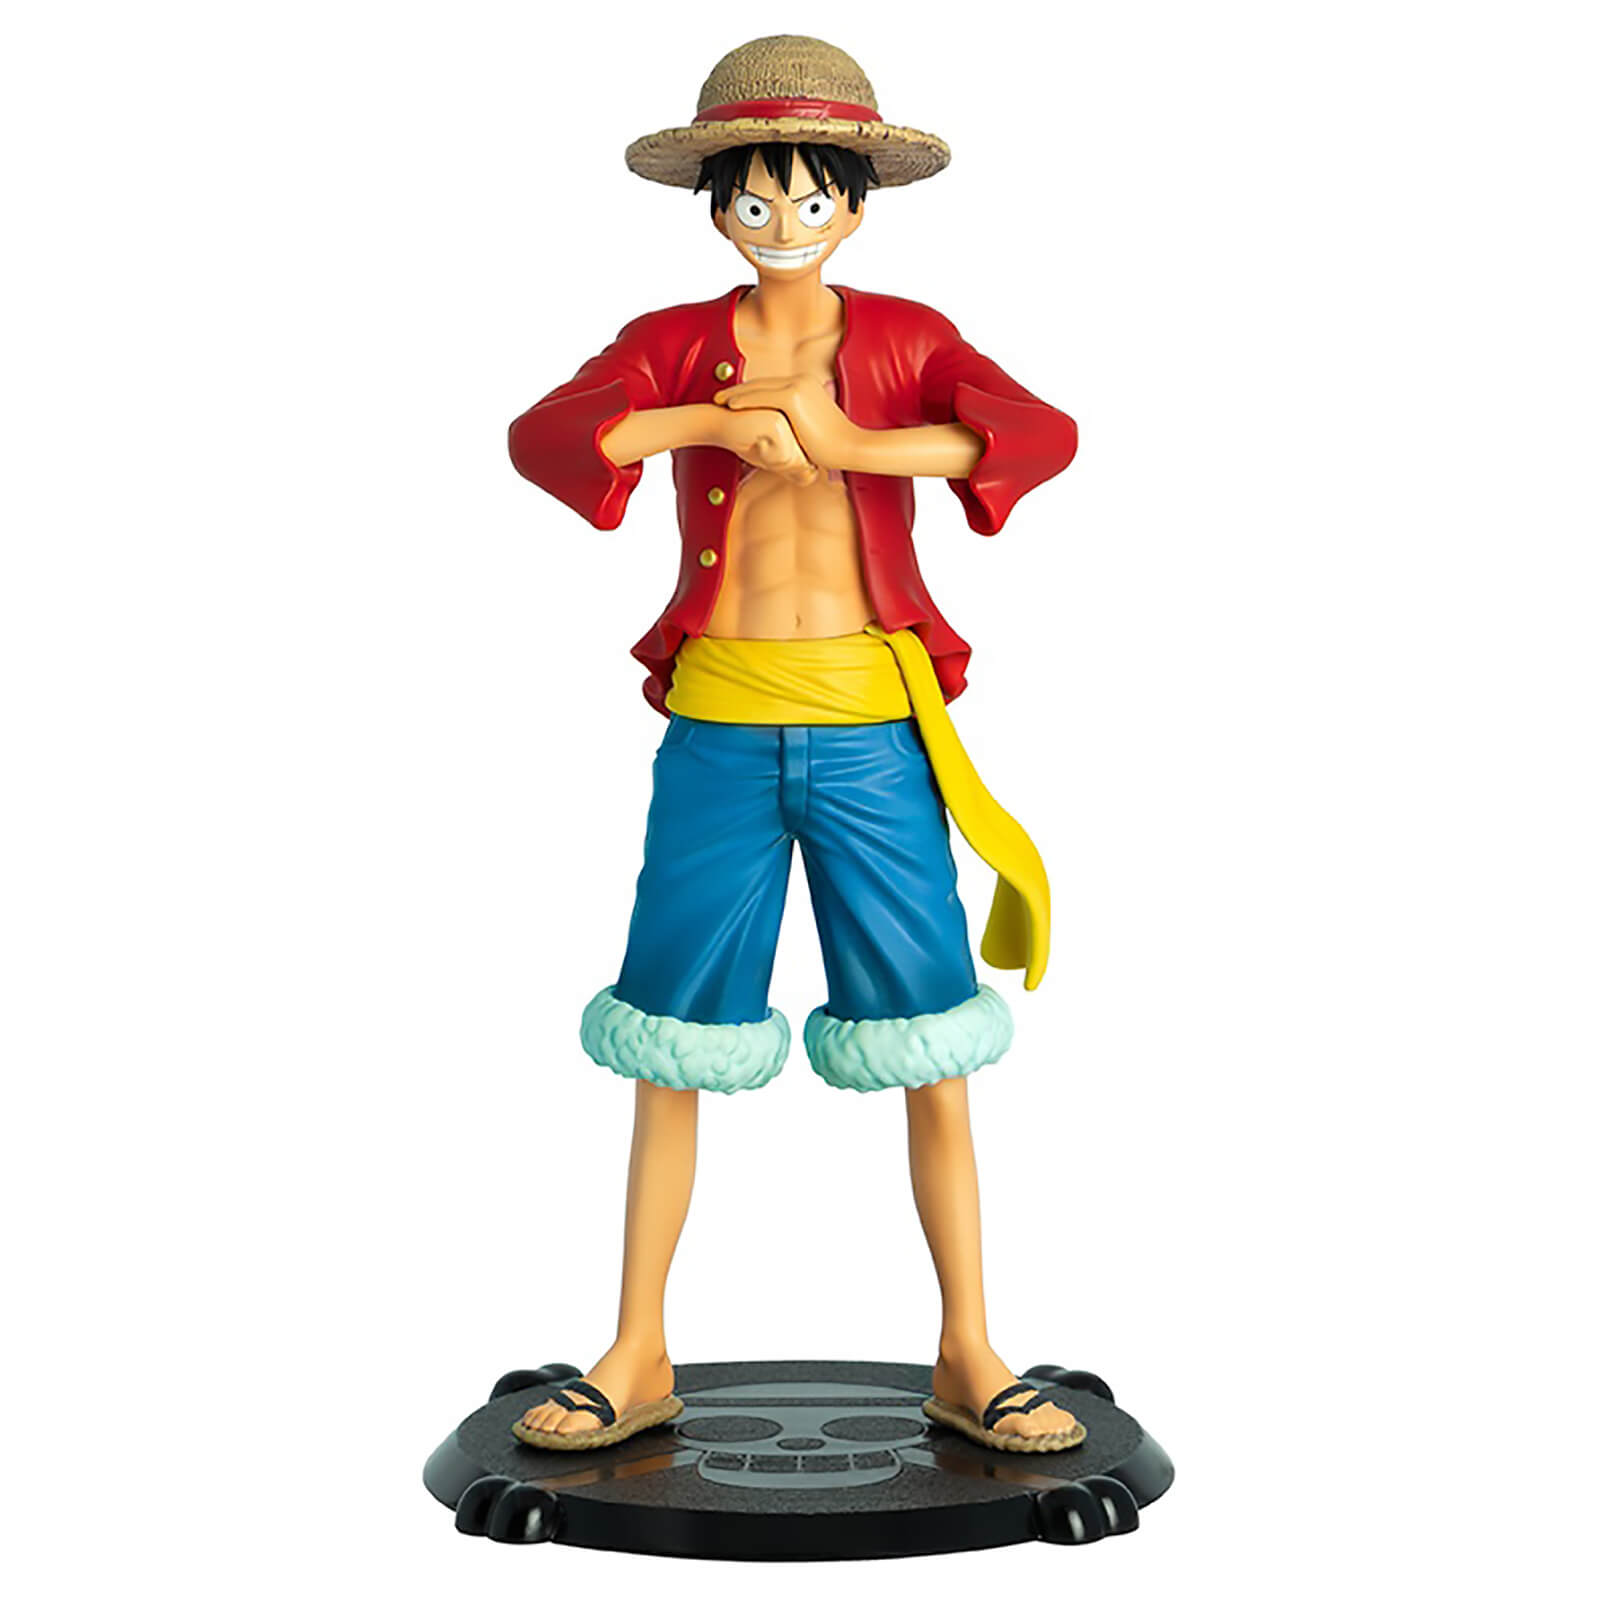 Abysse Corp One Piece Monkey D. Luffy Collector's Figurine product